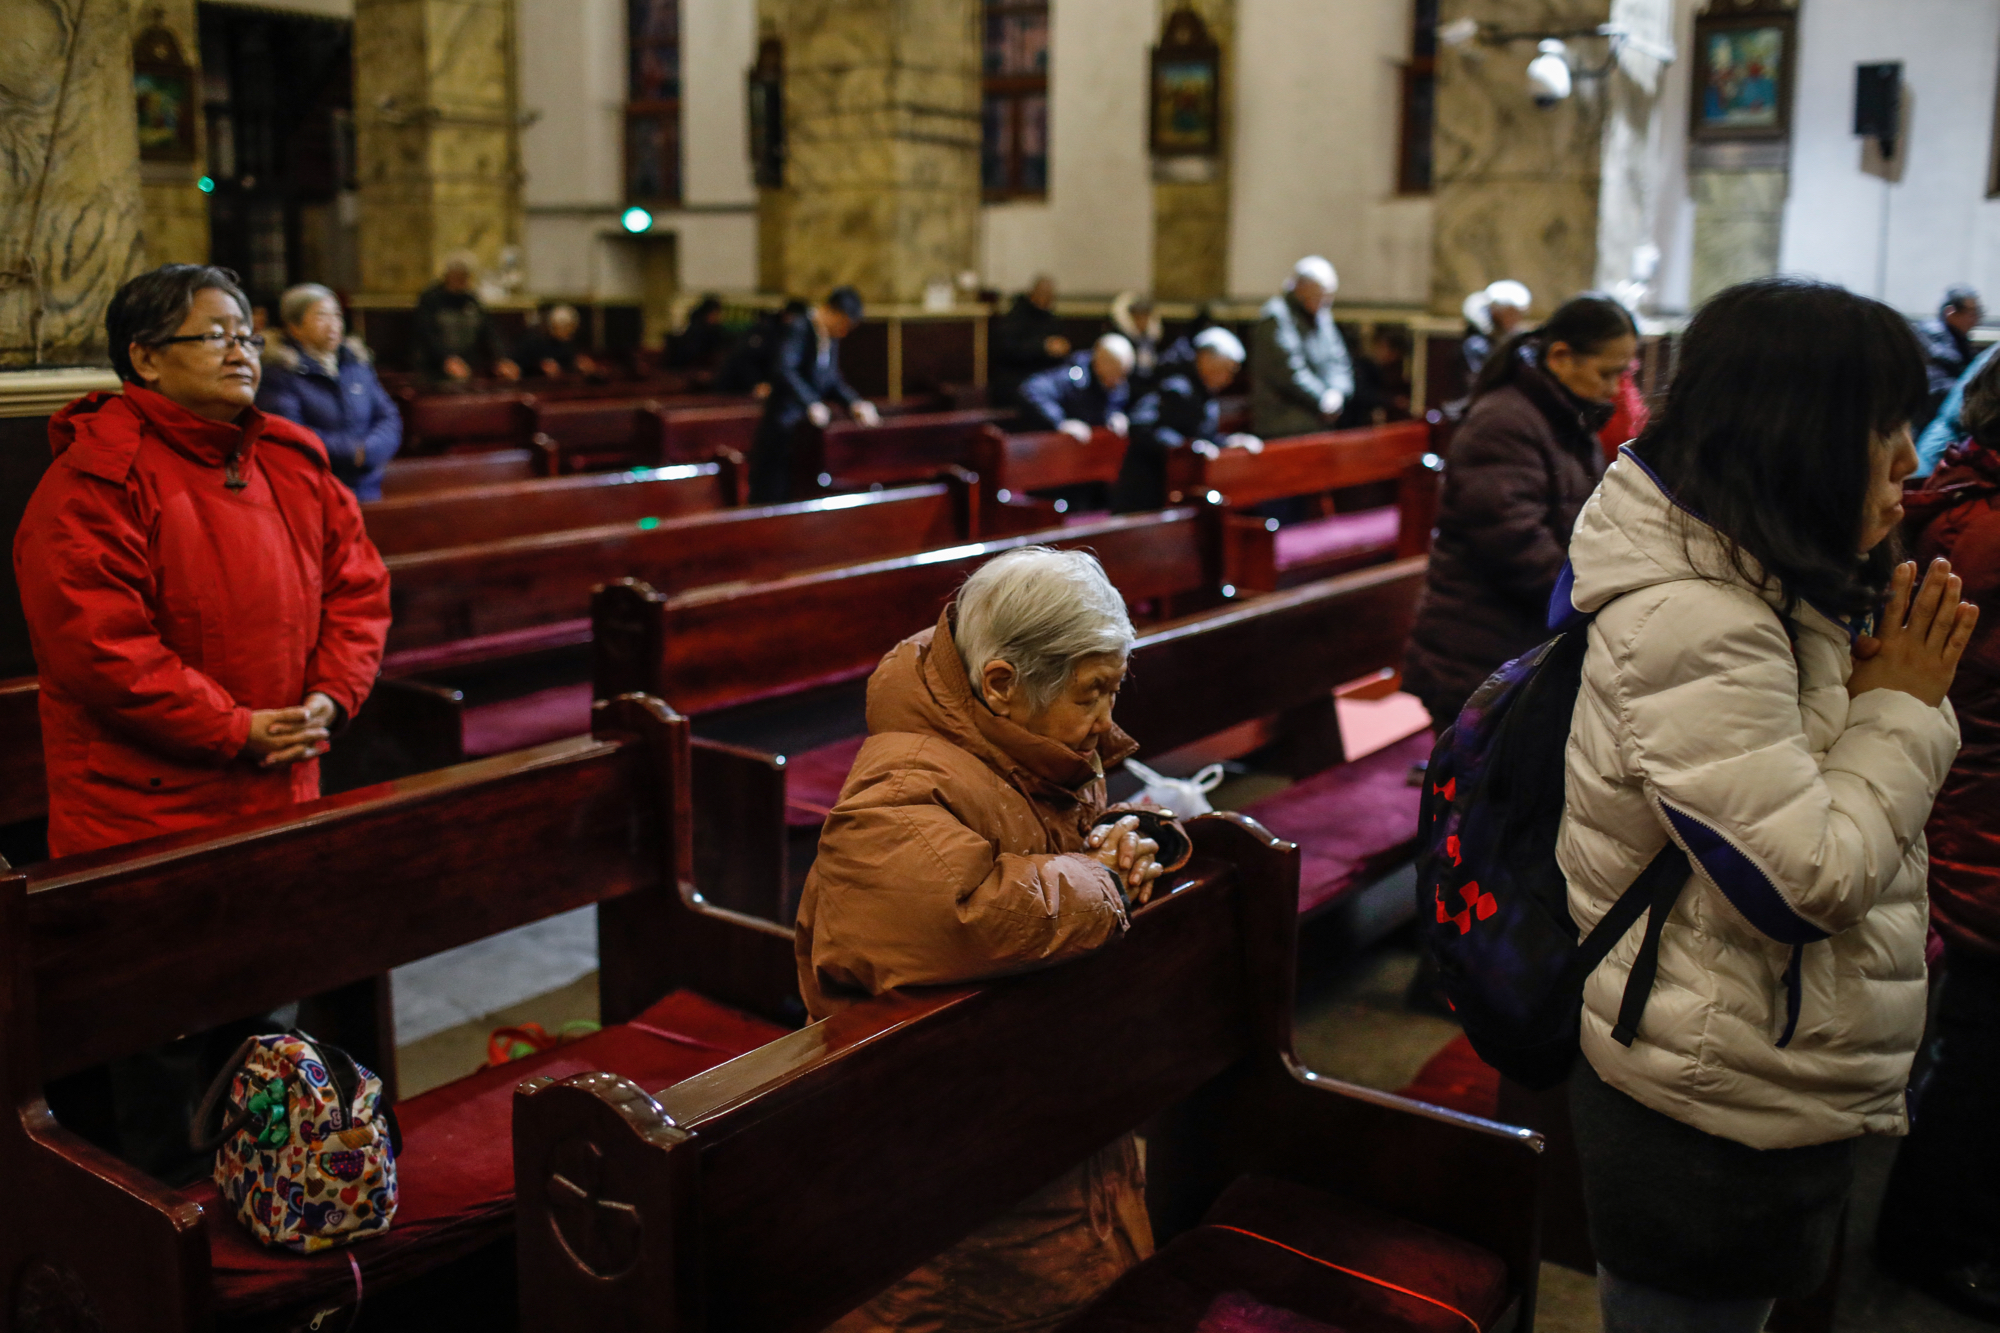 State monitoring of parishes in China intensifies 